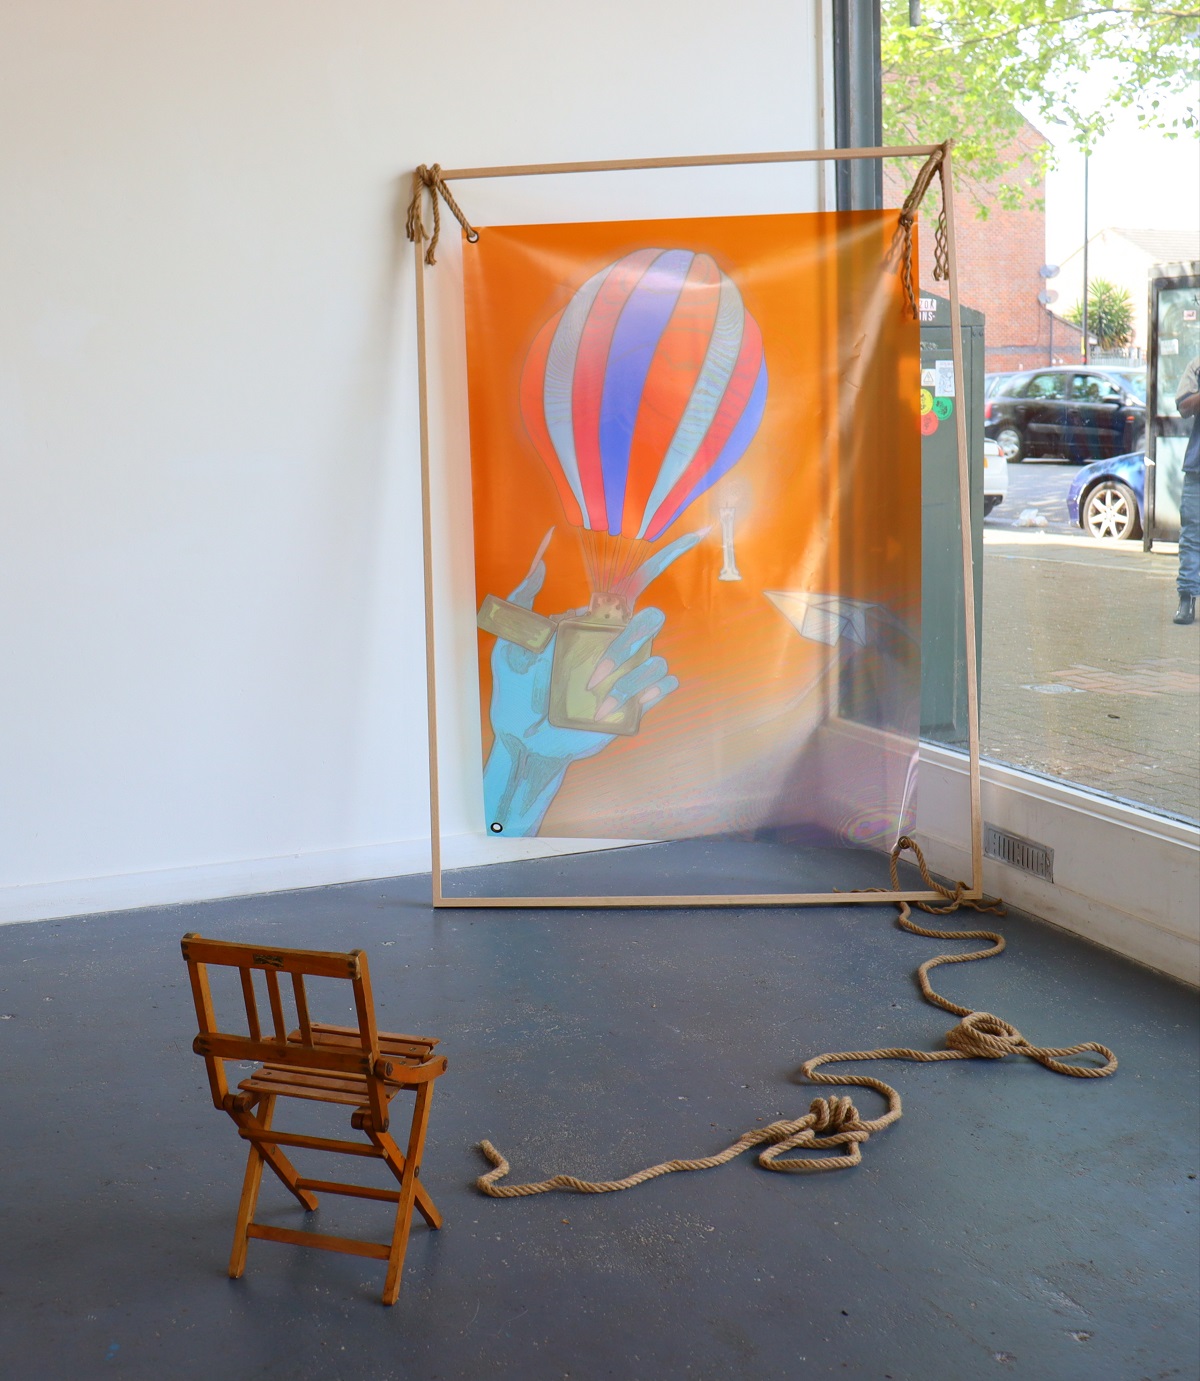 A picture of an installation where a small wooden chair is facing a colourful acetate print hanging from an oak frame via ropes.